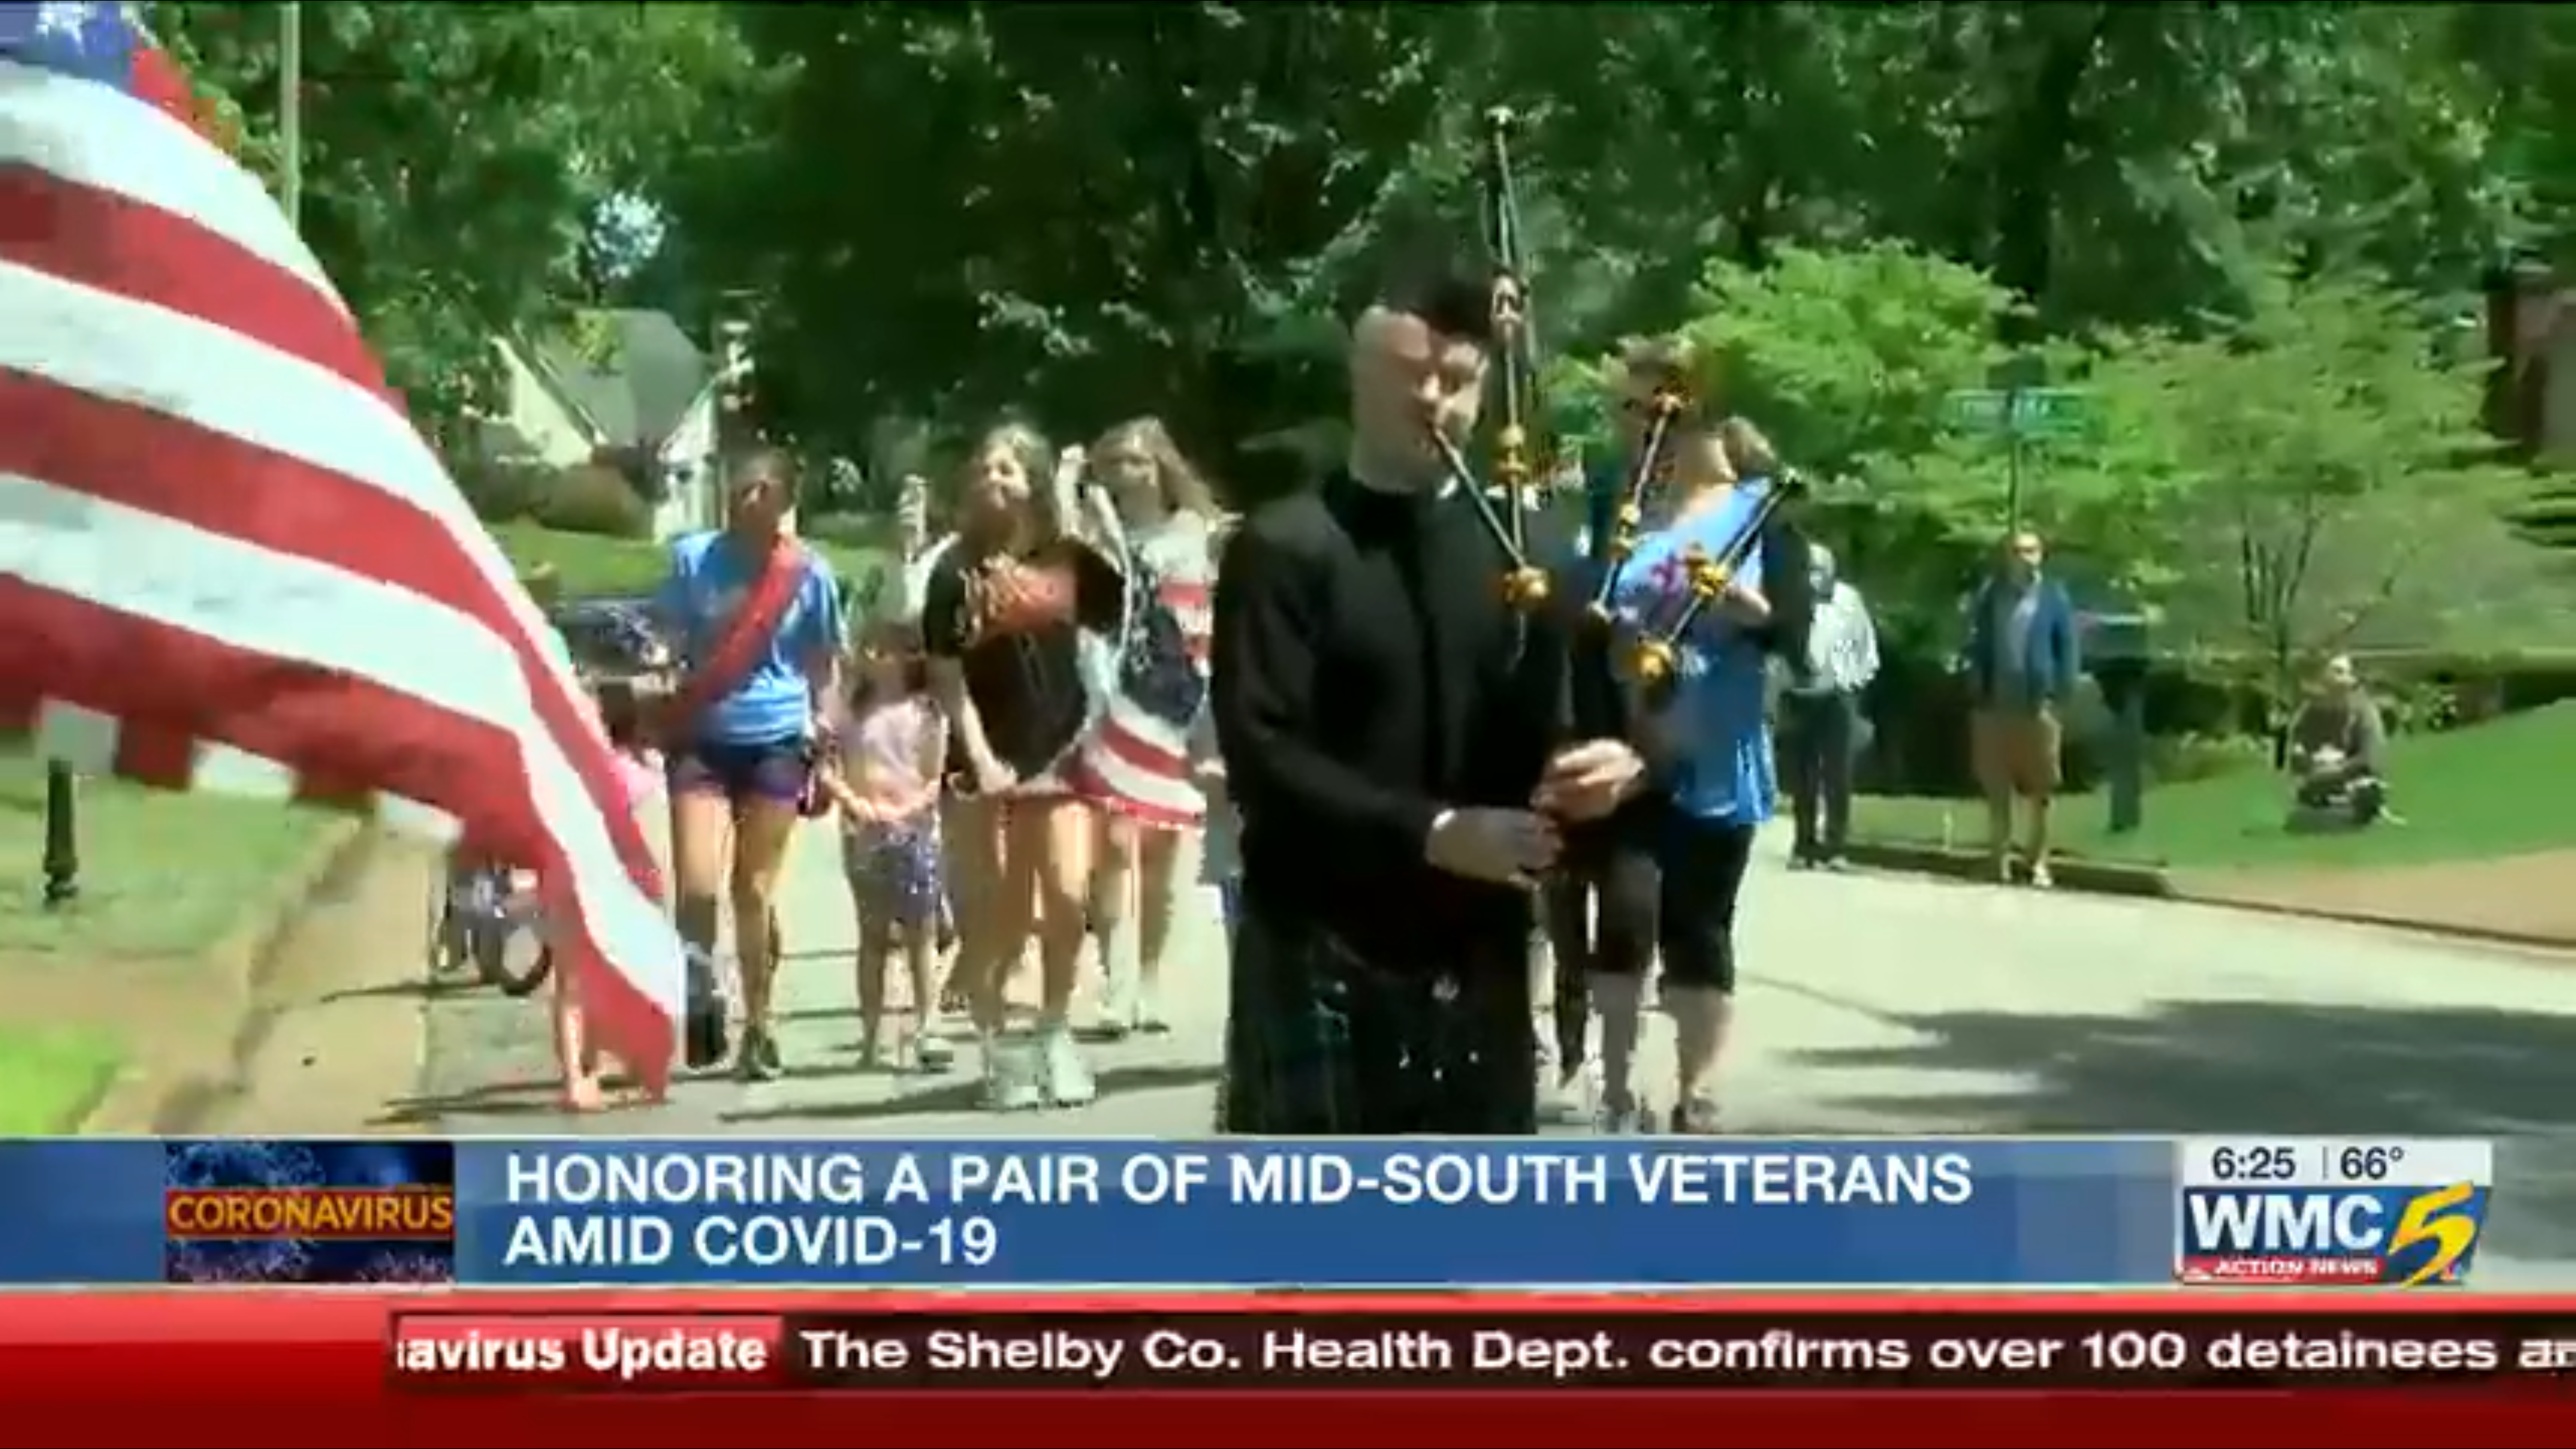 Parade celebrating 75 years of freedom thrown for two WWII POWs